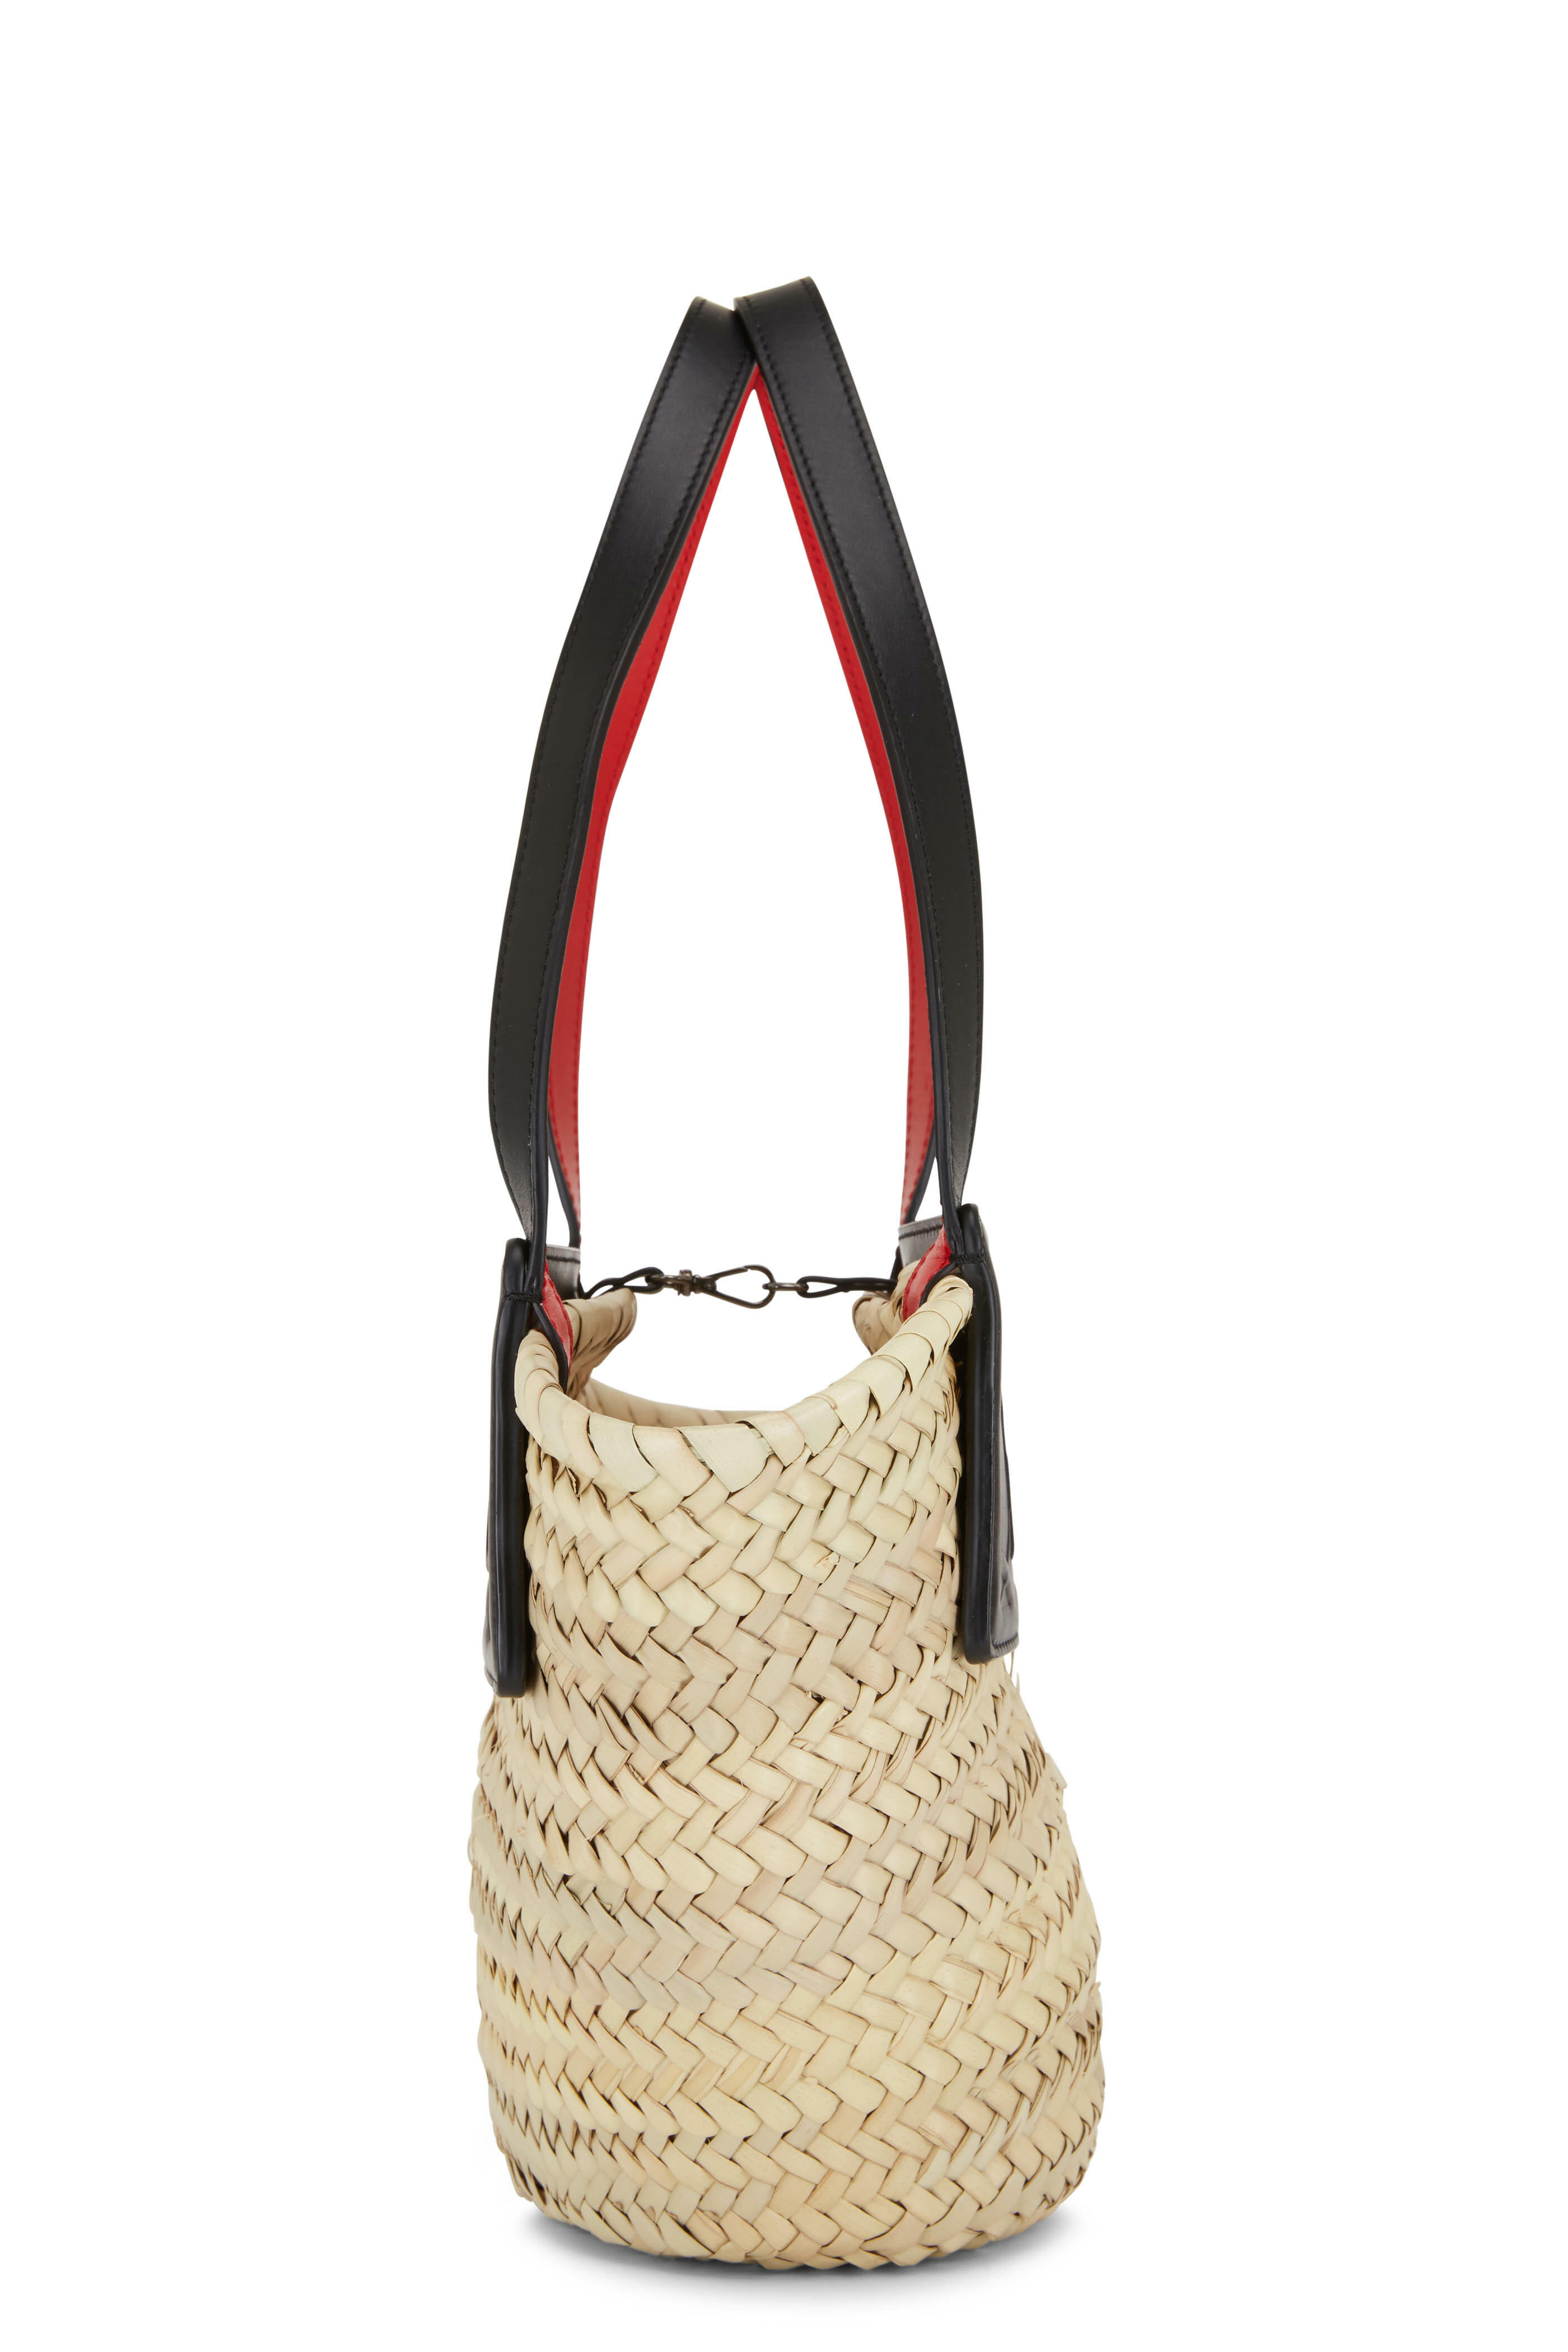 Christian Louboutin Cabarock Small Leather Tote Bag in Natural